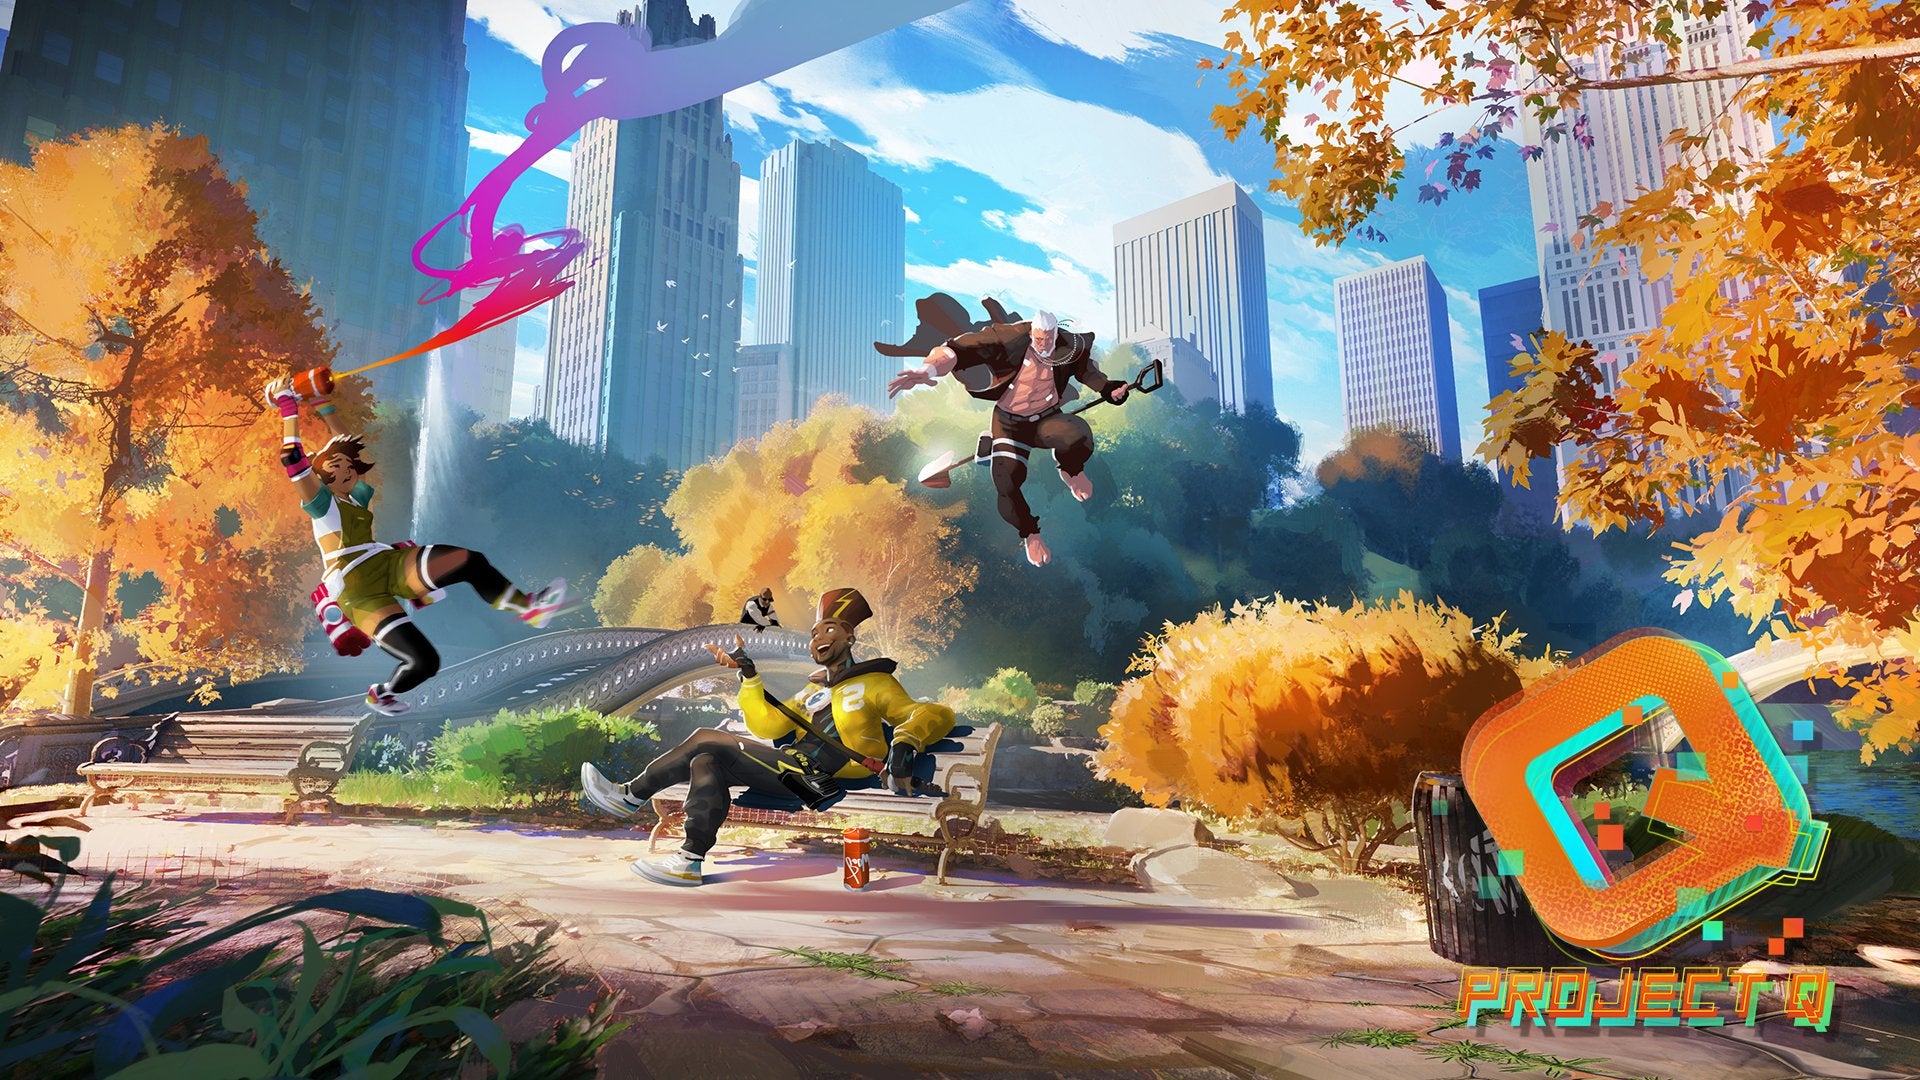 Image for Ubisoft confirms that its upcoming PvP battle arena game "Project Q" is real